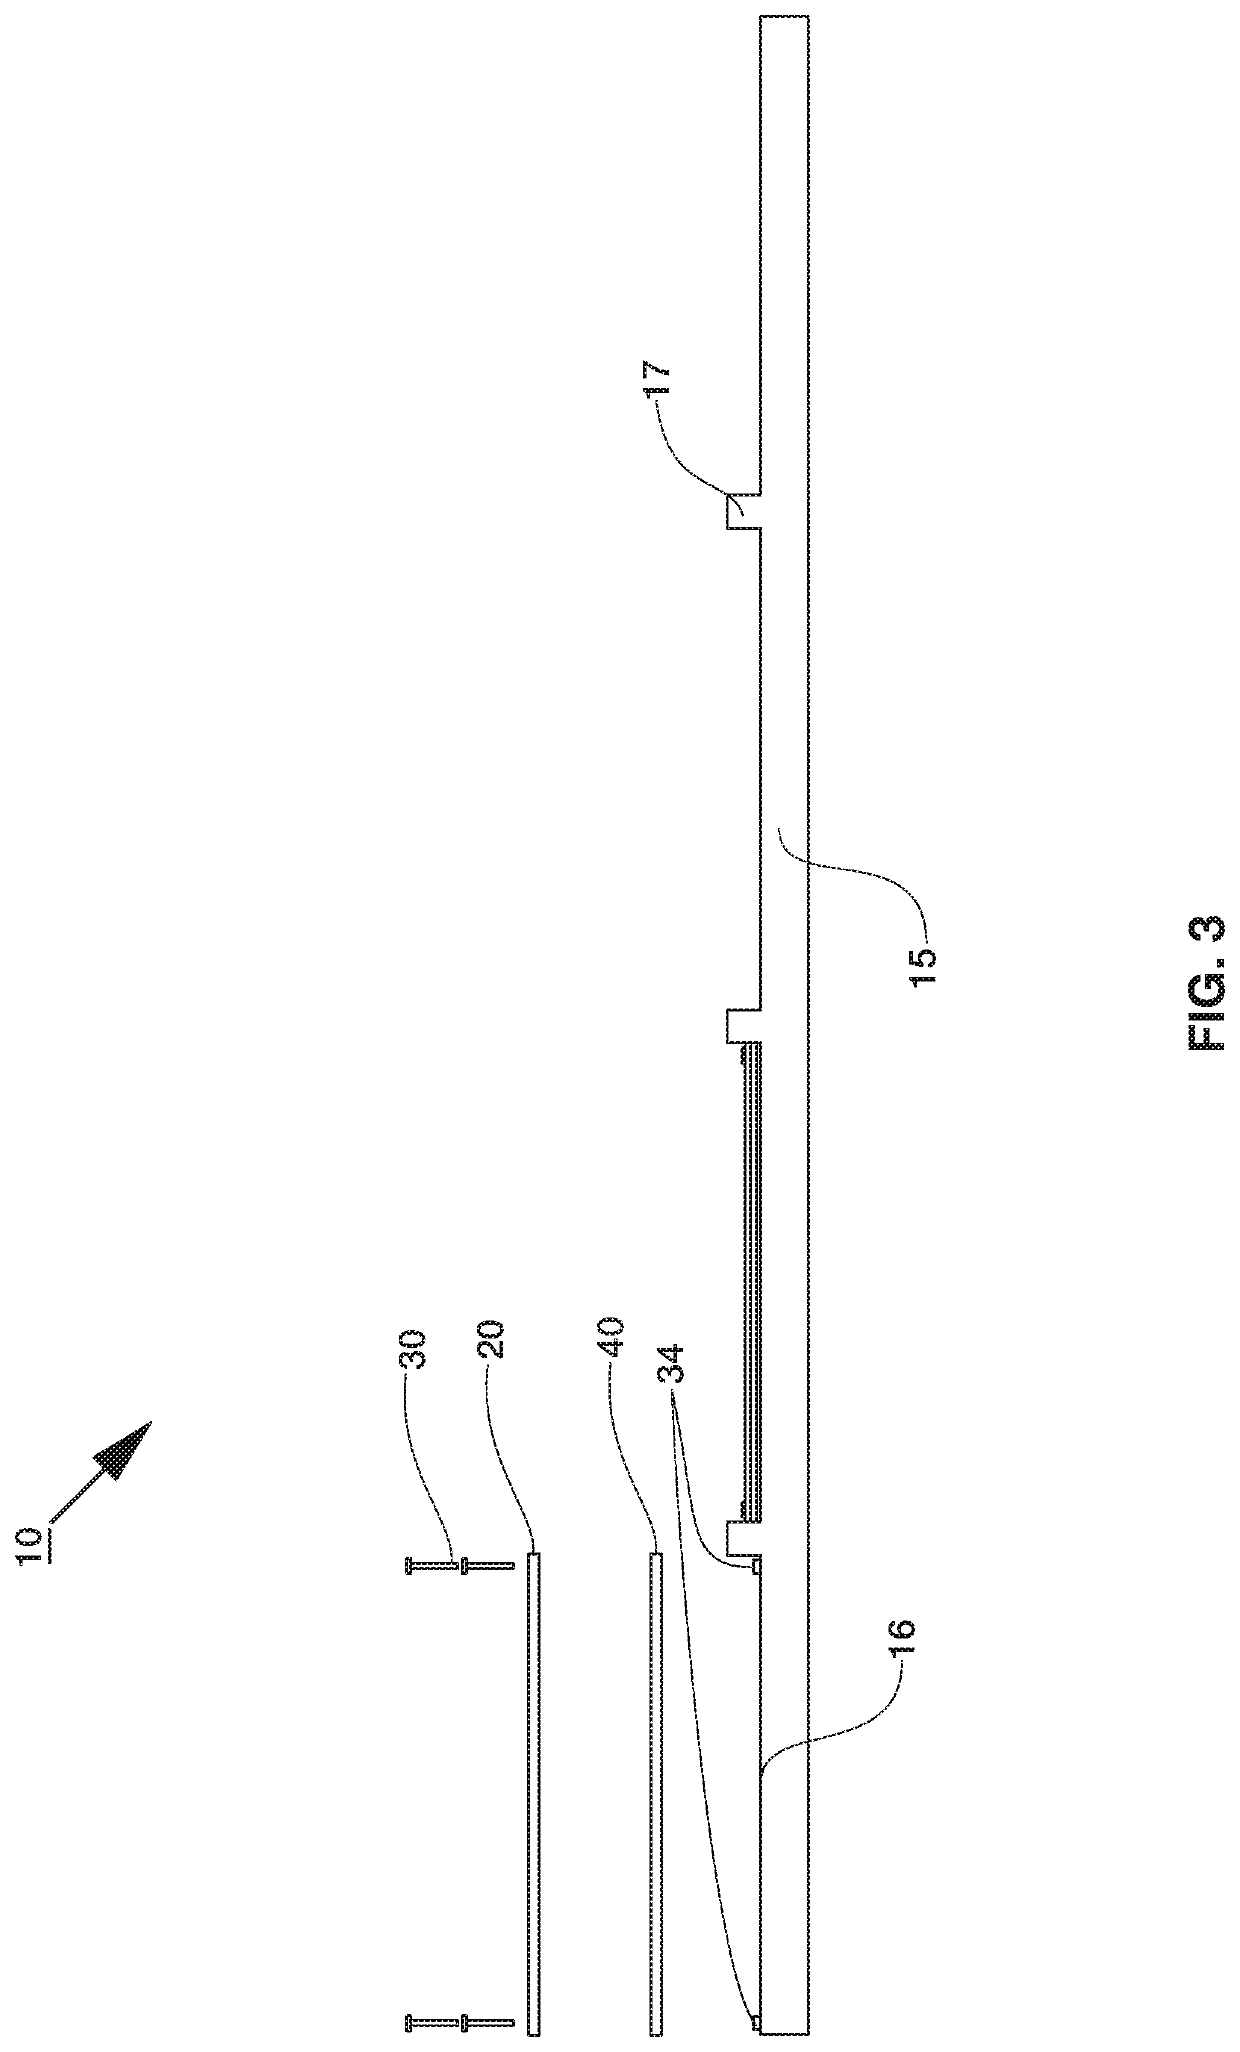 System and method of repairing seawalls and channel walls